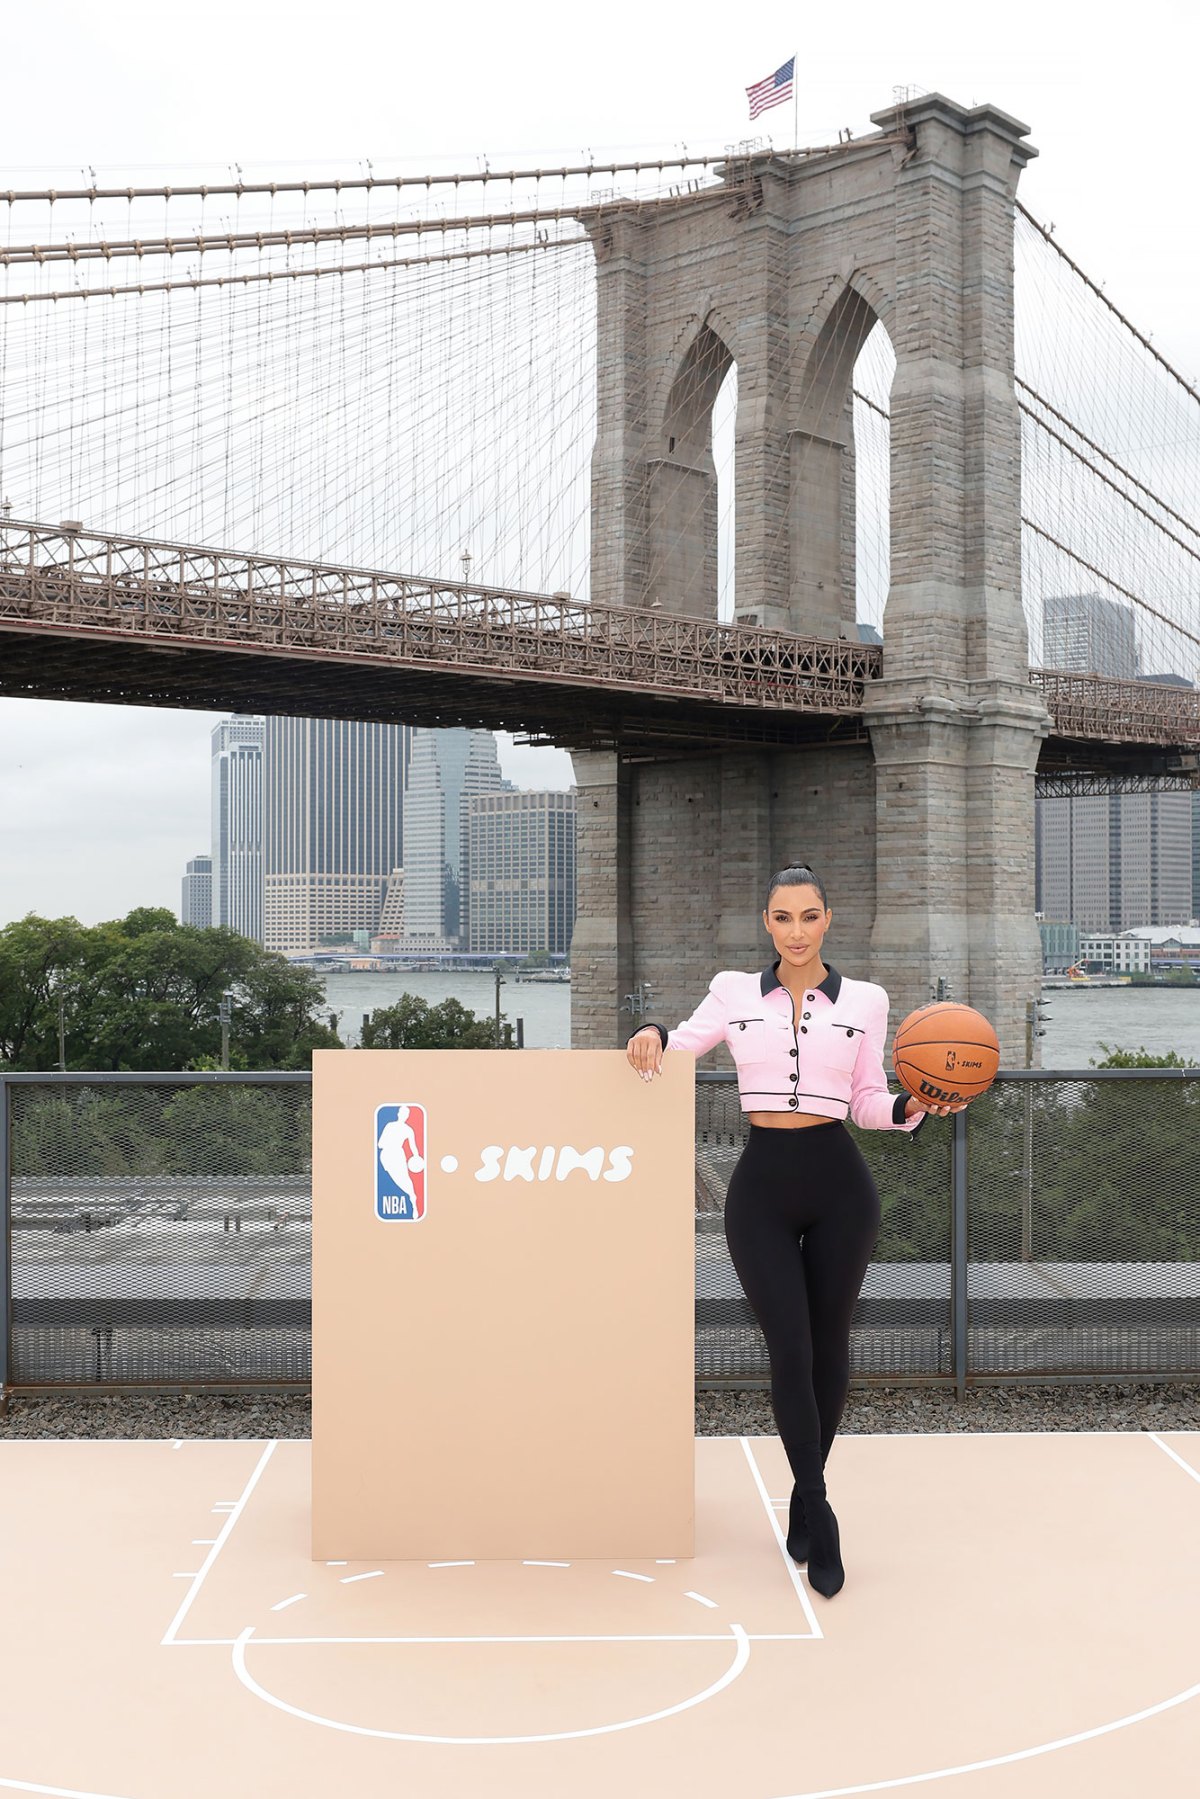 The NBA and Louis Vuitton Announce Official Partnership - Black